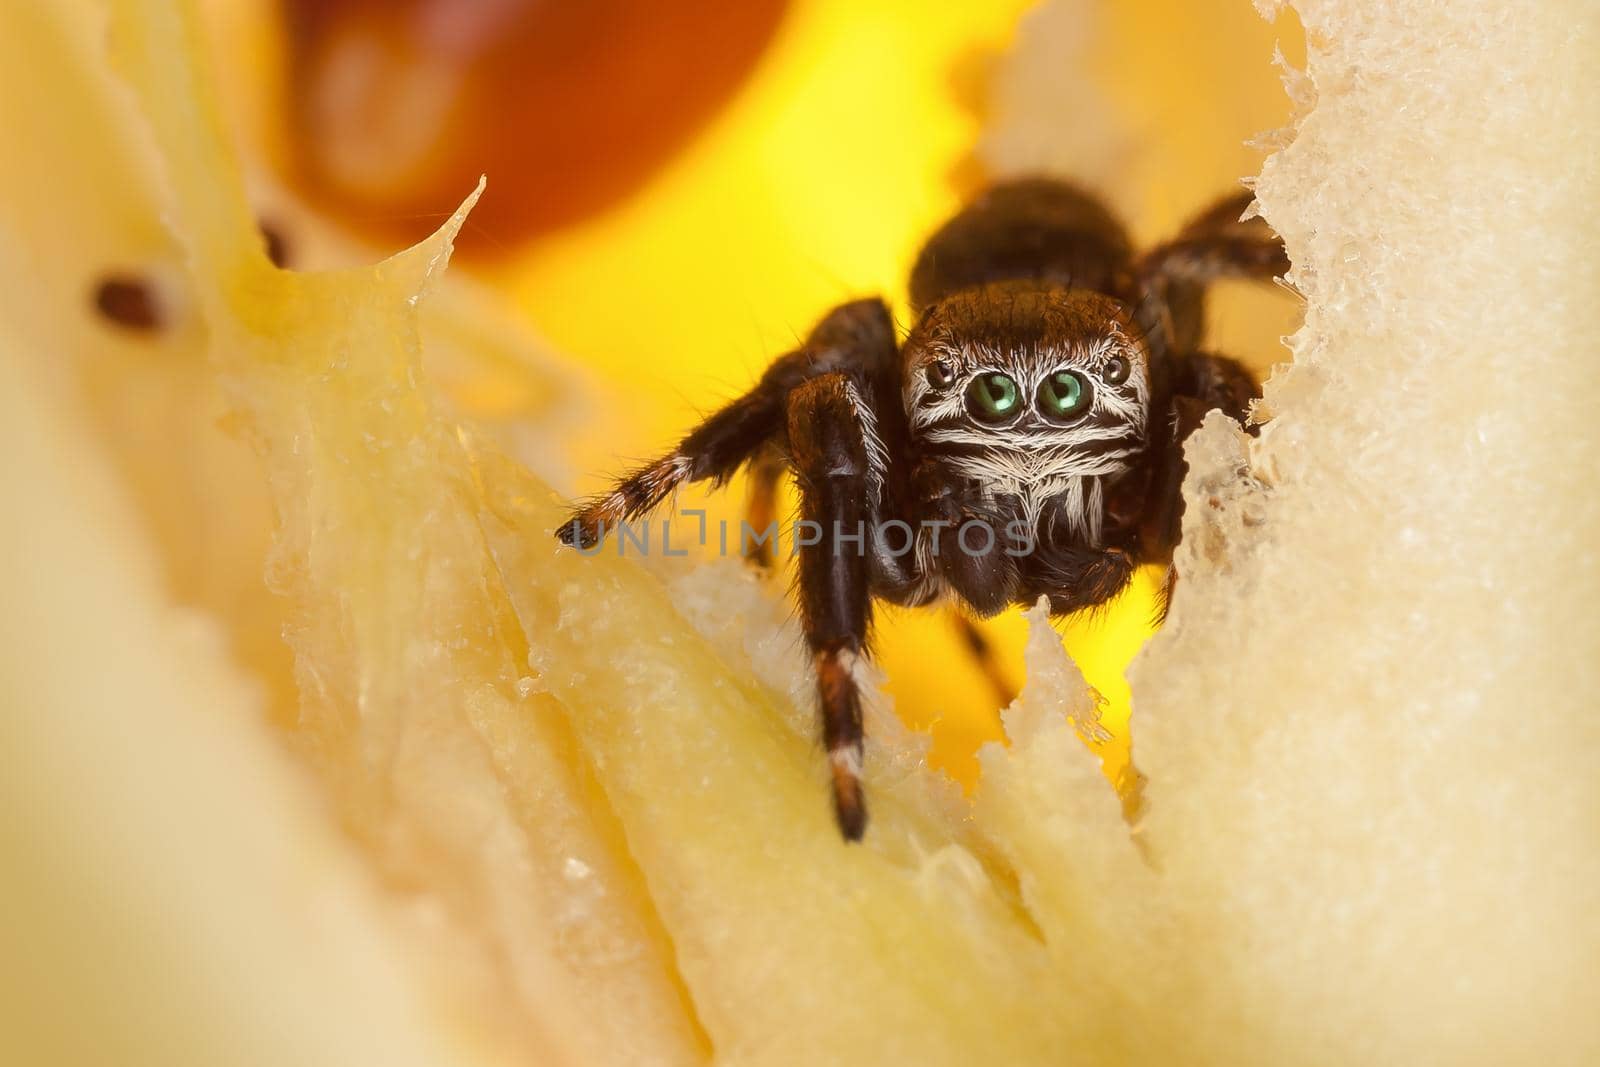 Jumping spider inside yellow chopped apple